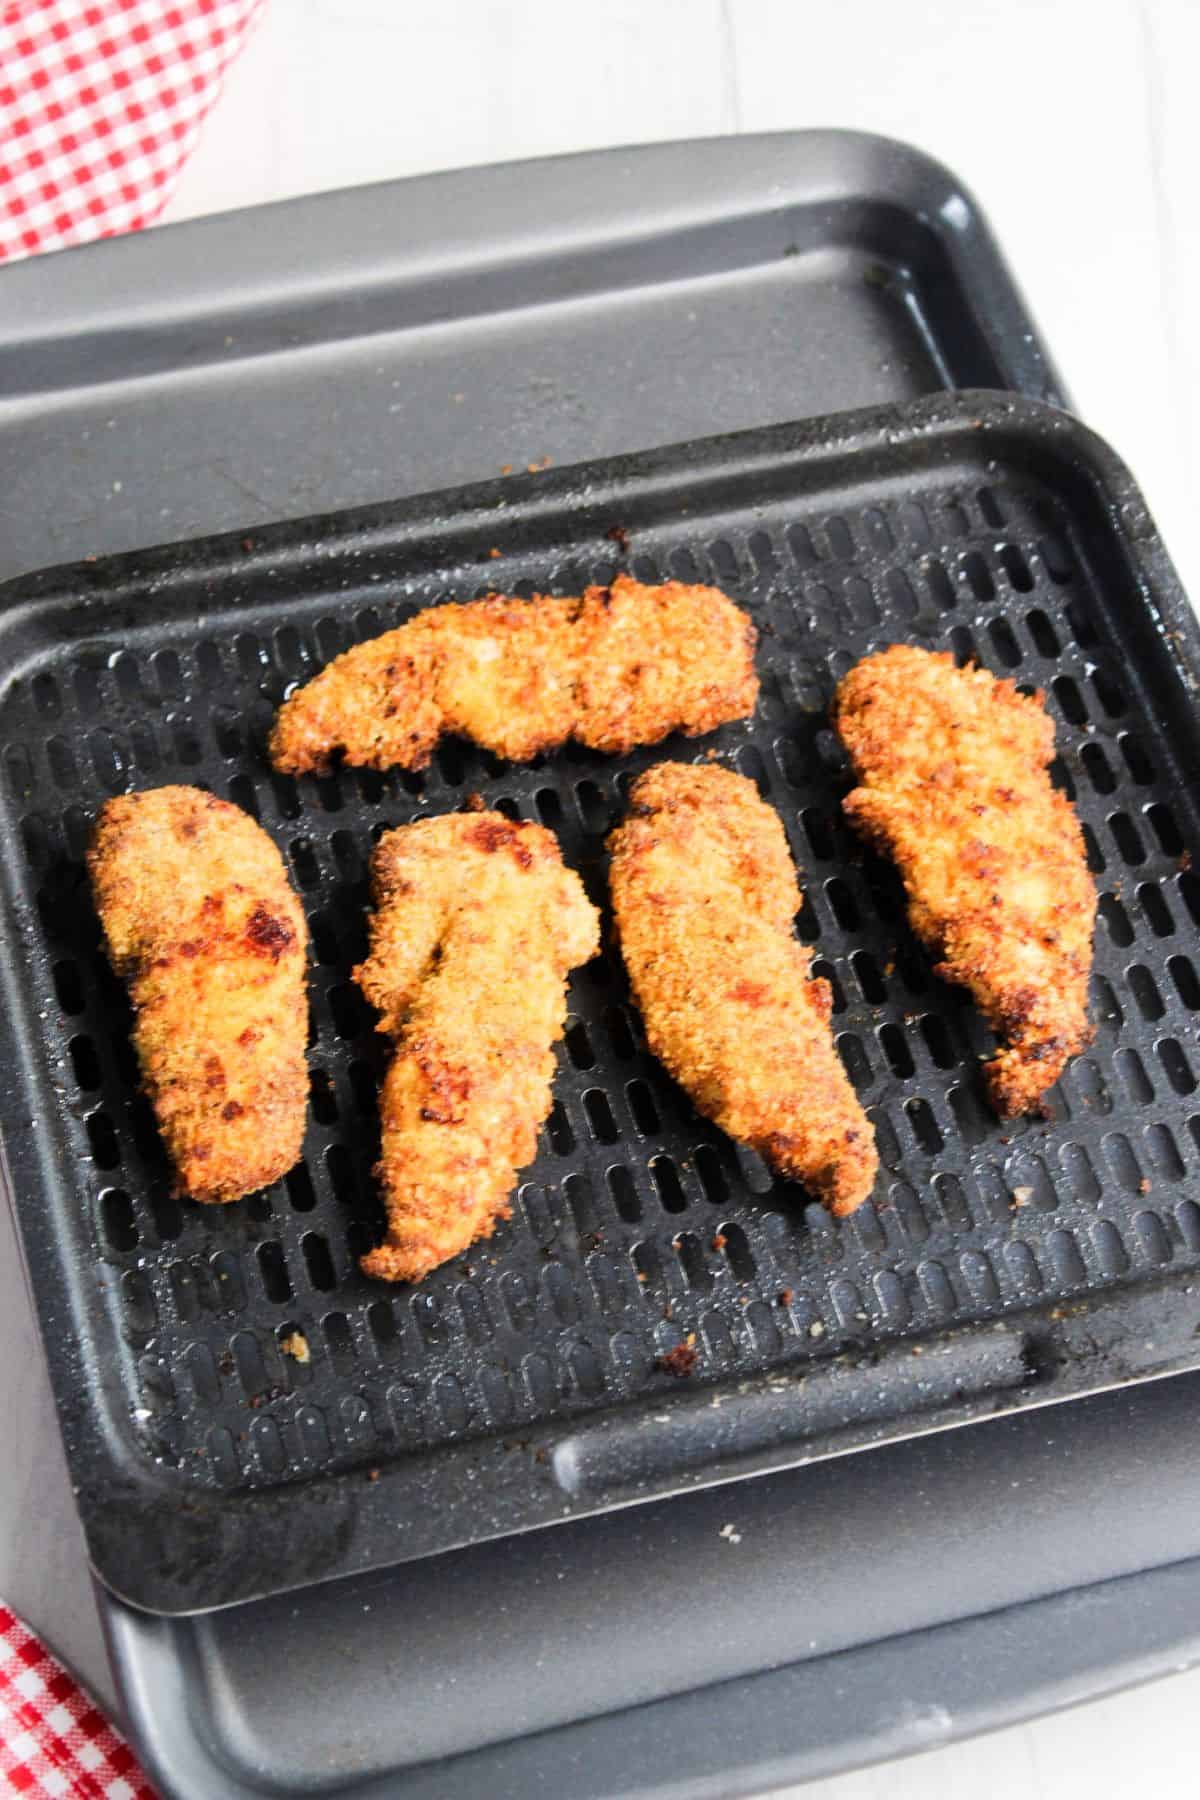 Air fryer chicken tenders on tray with a checkered tablecloth.